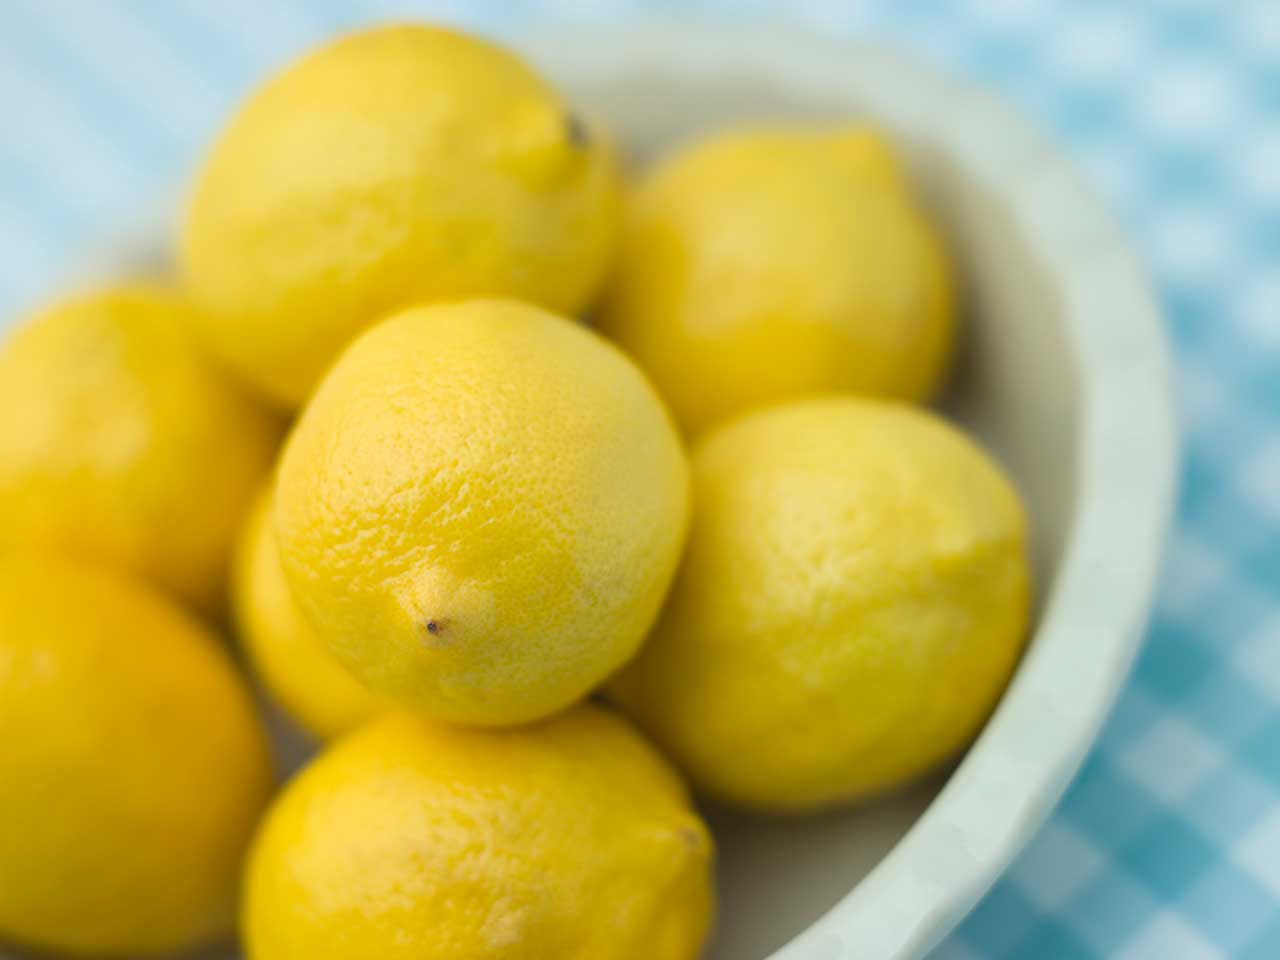 Image of lemons which, surprisingly, become alkaline when ingested